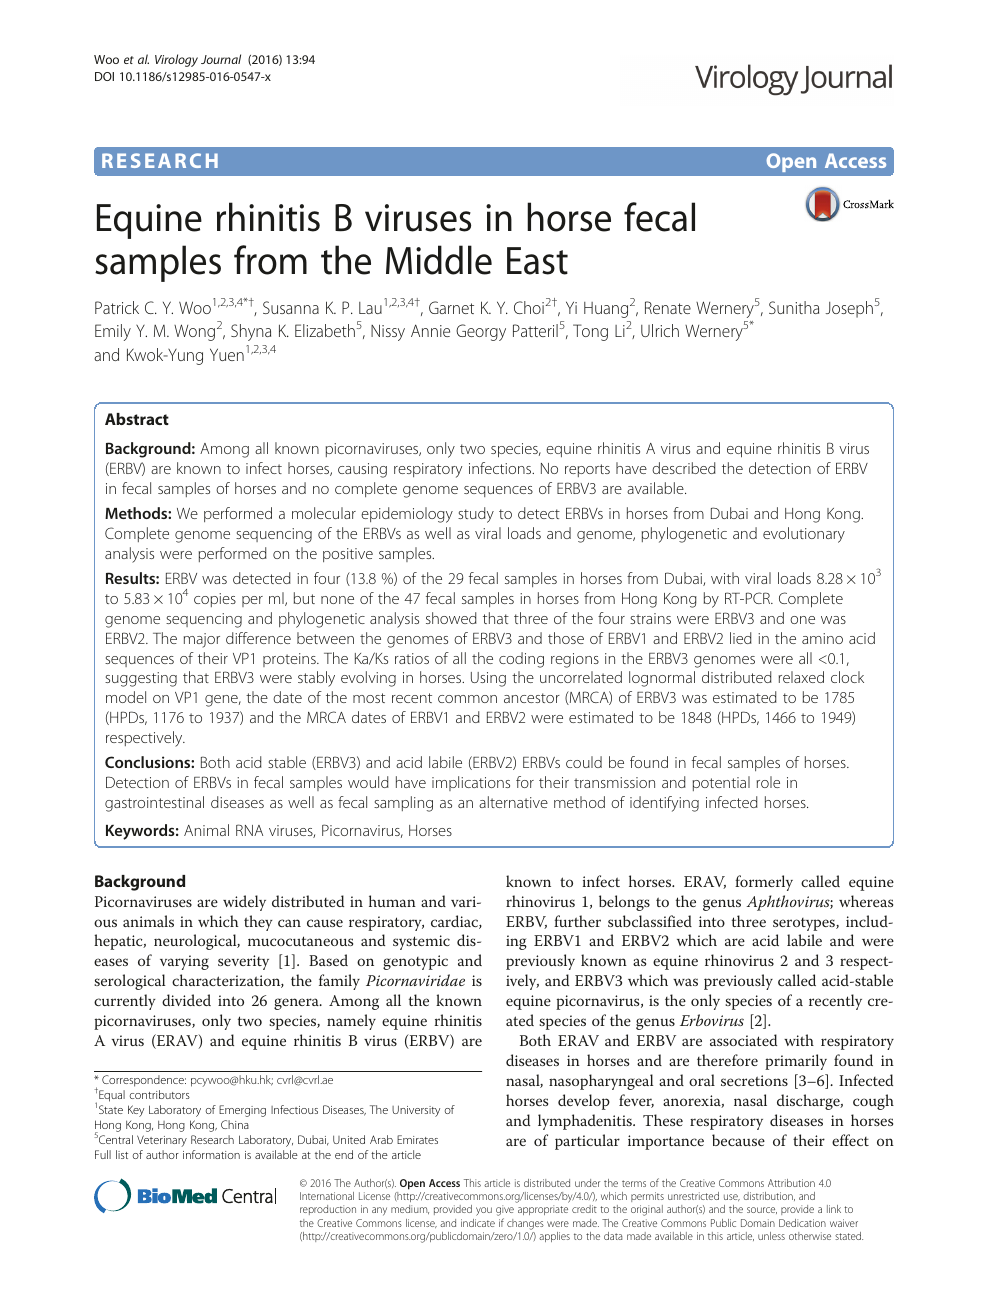 Equine Rhinitis B Viruses In Horse Fecal Samples From The Middle East Topic Of Research Paper In Veterinary Science Download Scholarly Article Pdf And Read For Free On Cyberleninka Open Science